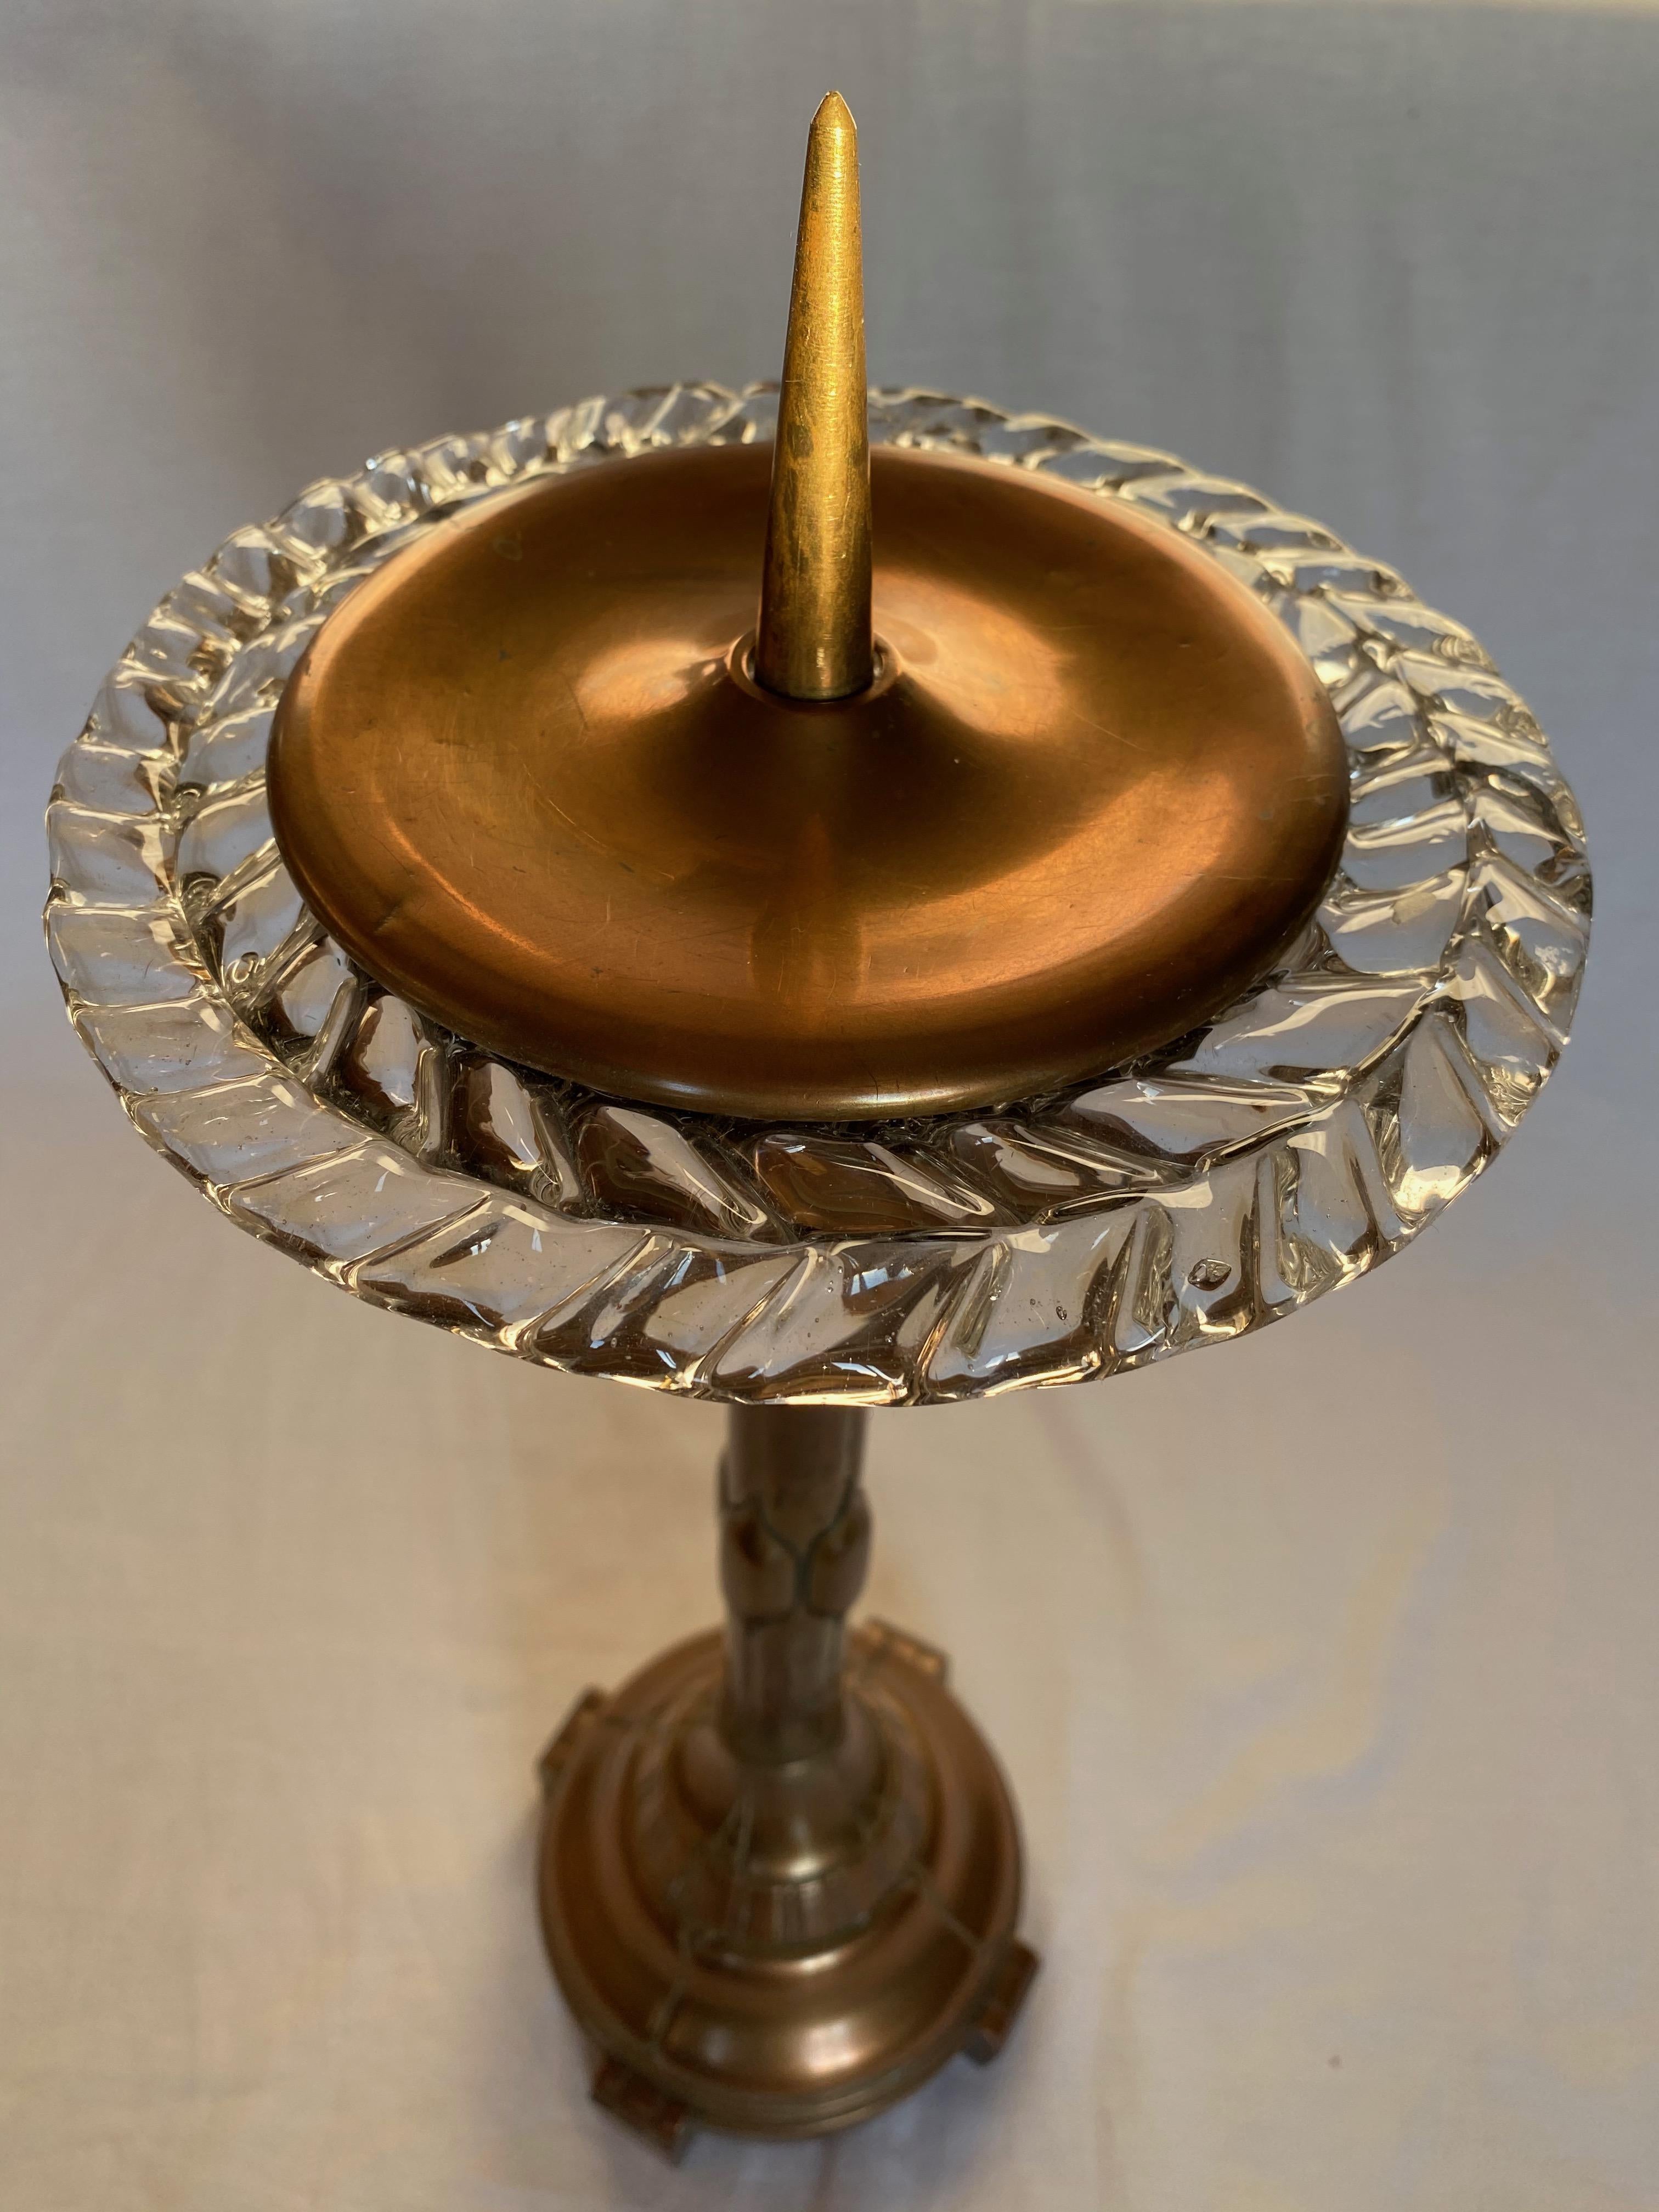 Rare candleholder in copper and Murano glass by Ercole Barovier.